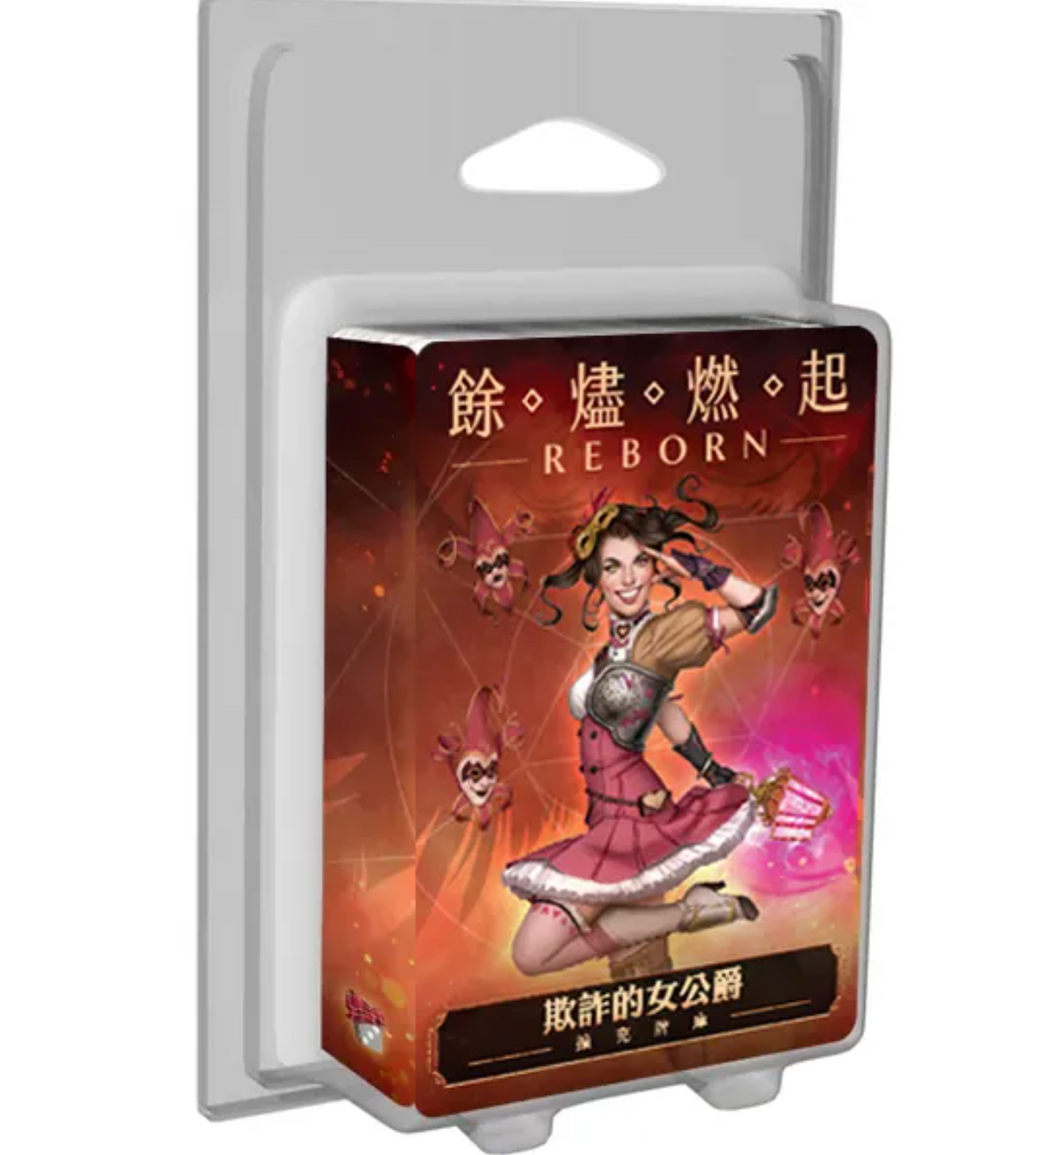 Ashes Reborn The Duchess of Deception Expansion - 餘燼燃起 欺詐的女公爵 牌庫擴充 - [GoodMoveBG]